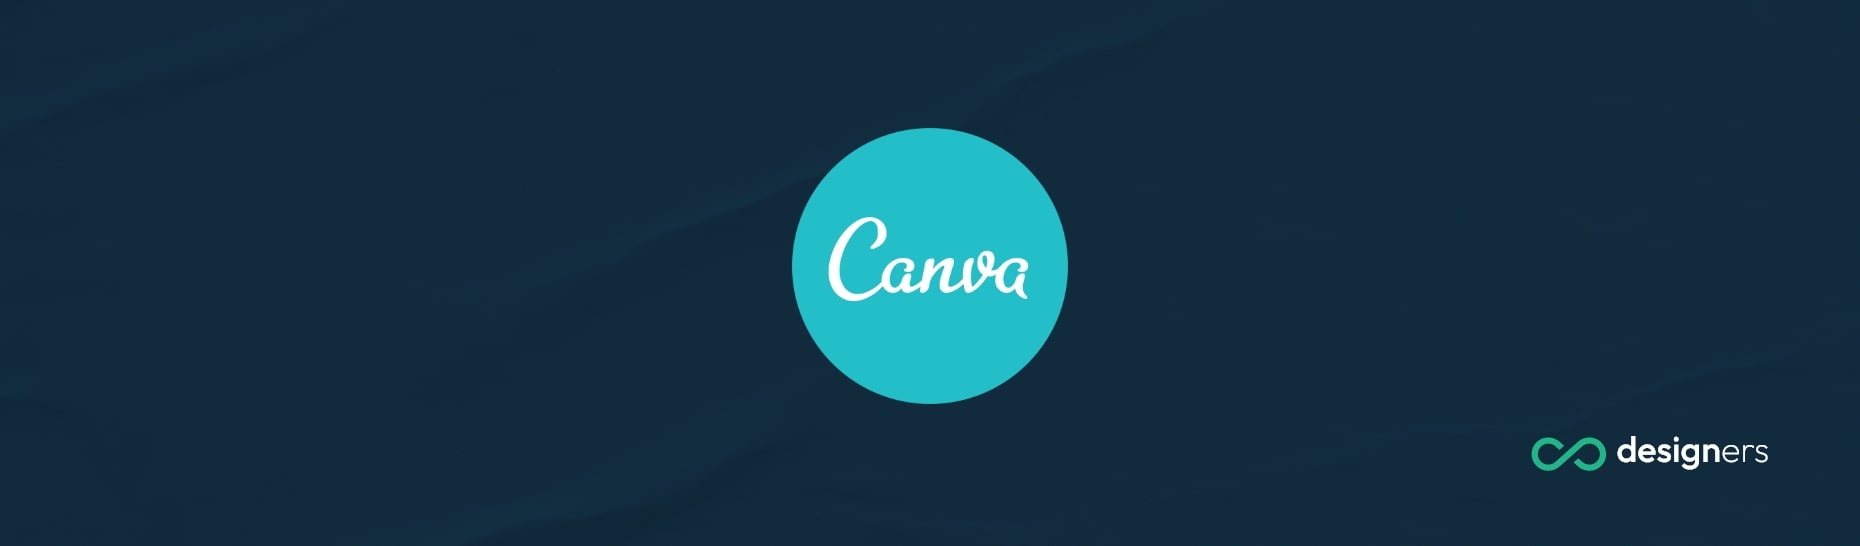 Where Does Canva Advertise?